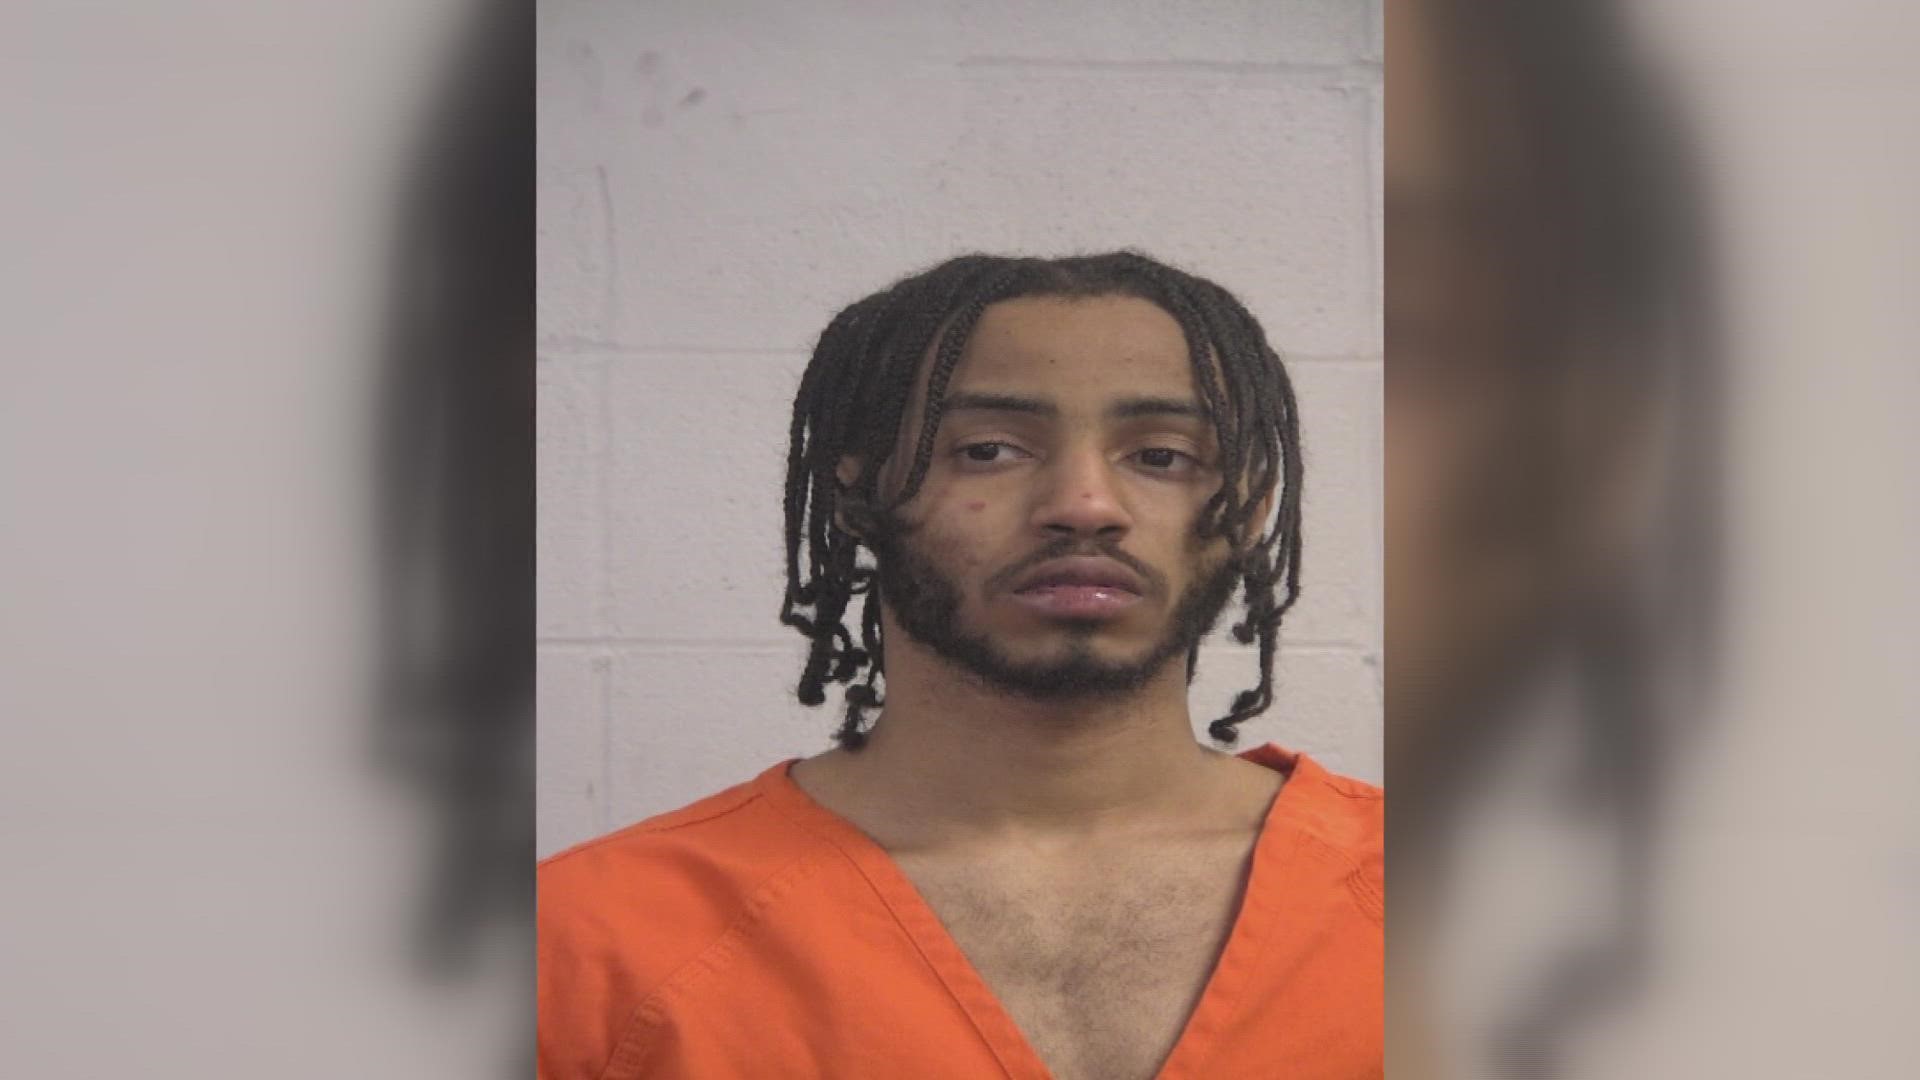 According to LMPD, Brendan Bell, 21, admitted to the shooting multiple times during his arrest and apologized for what he had done.